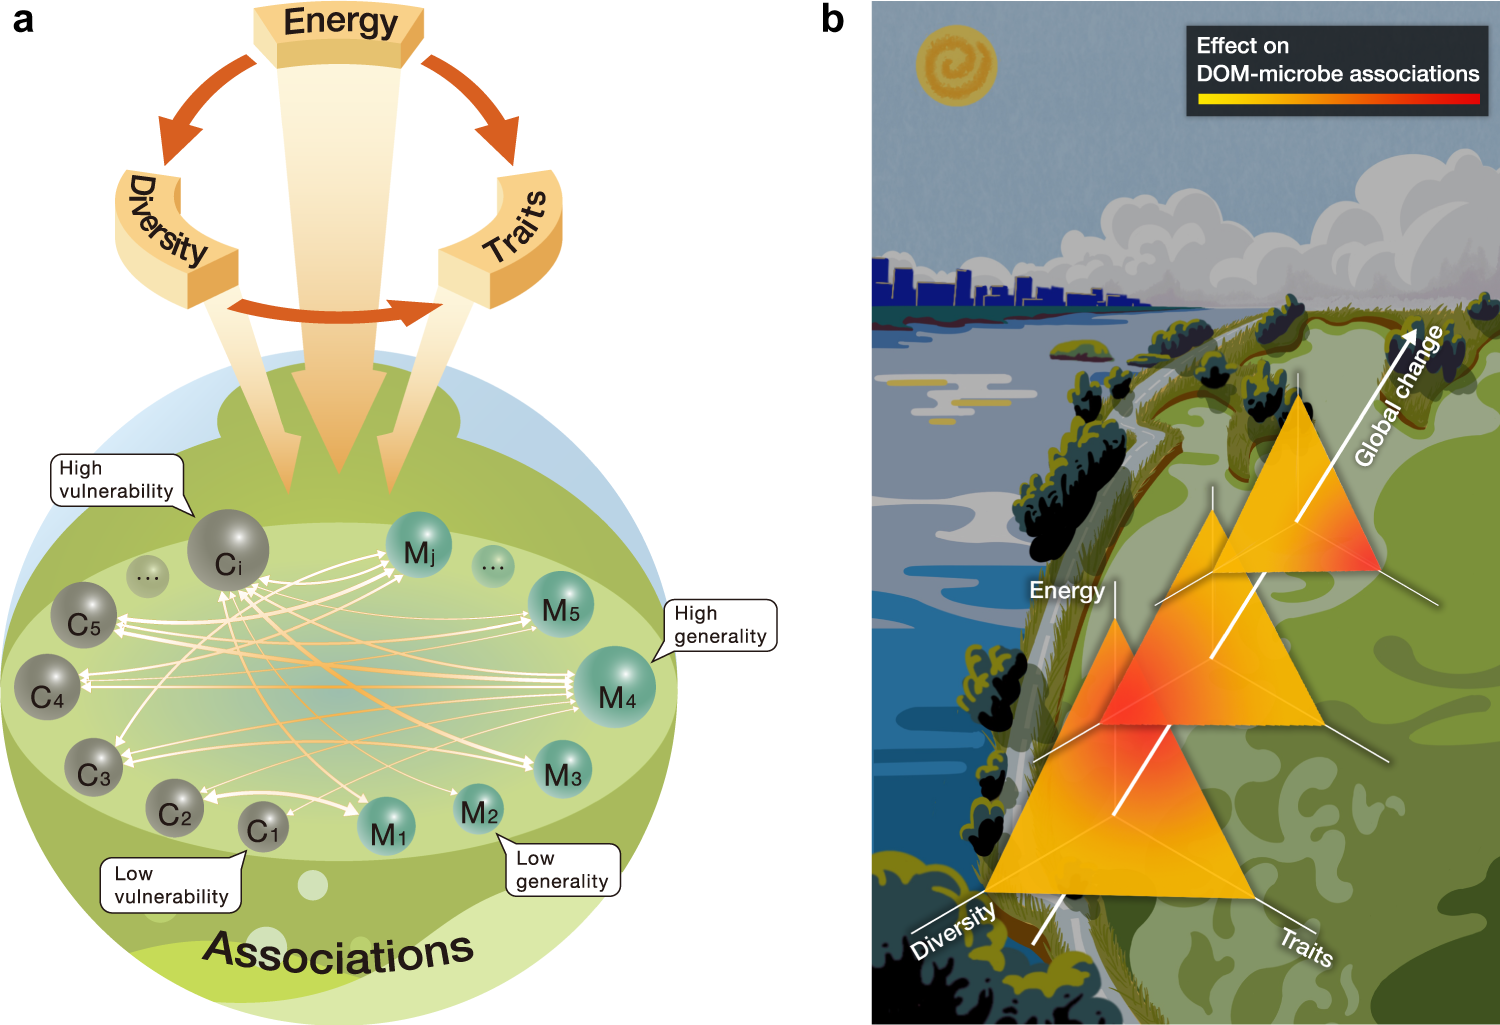 Ecological networks of dissolved organic matter and microorganisms under  global change | Nature Communications